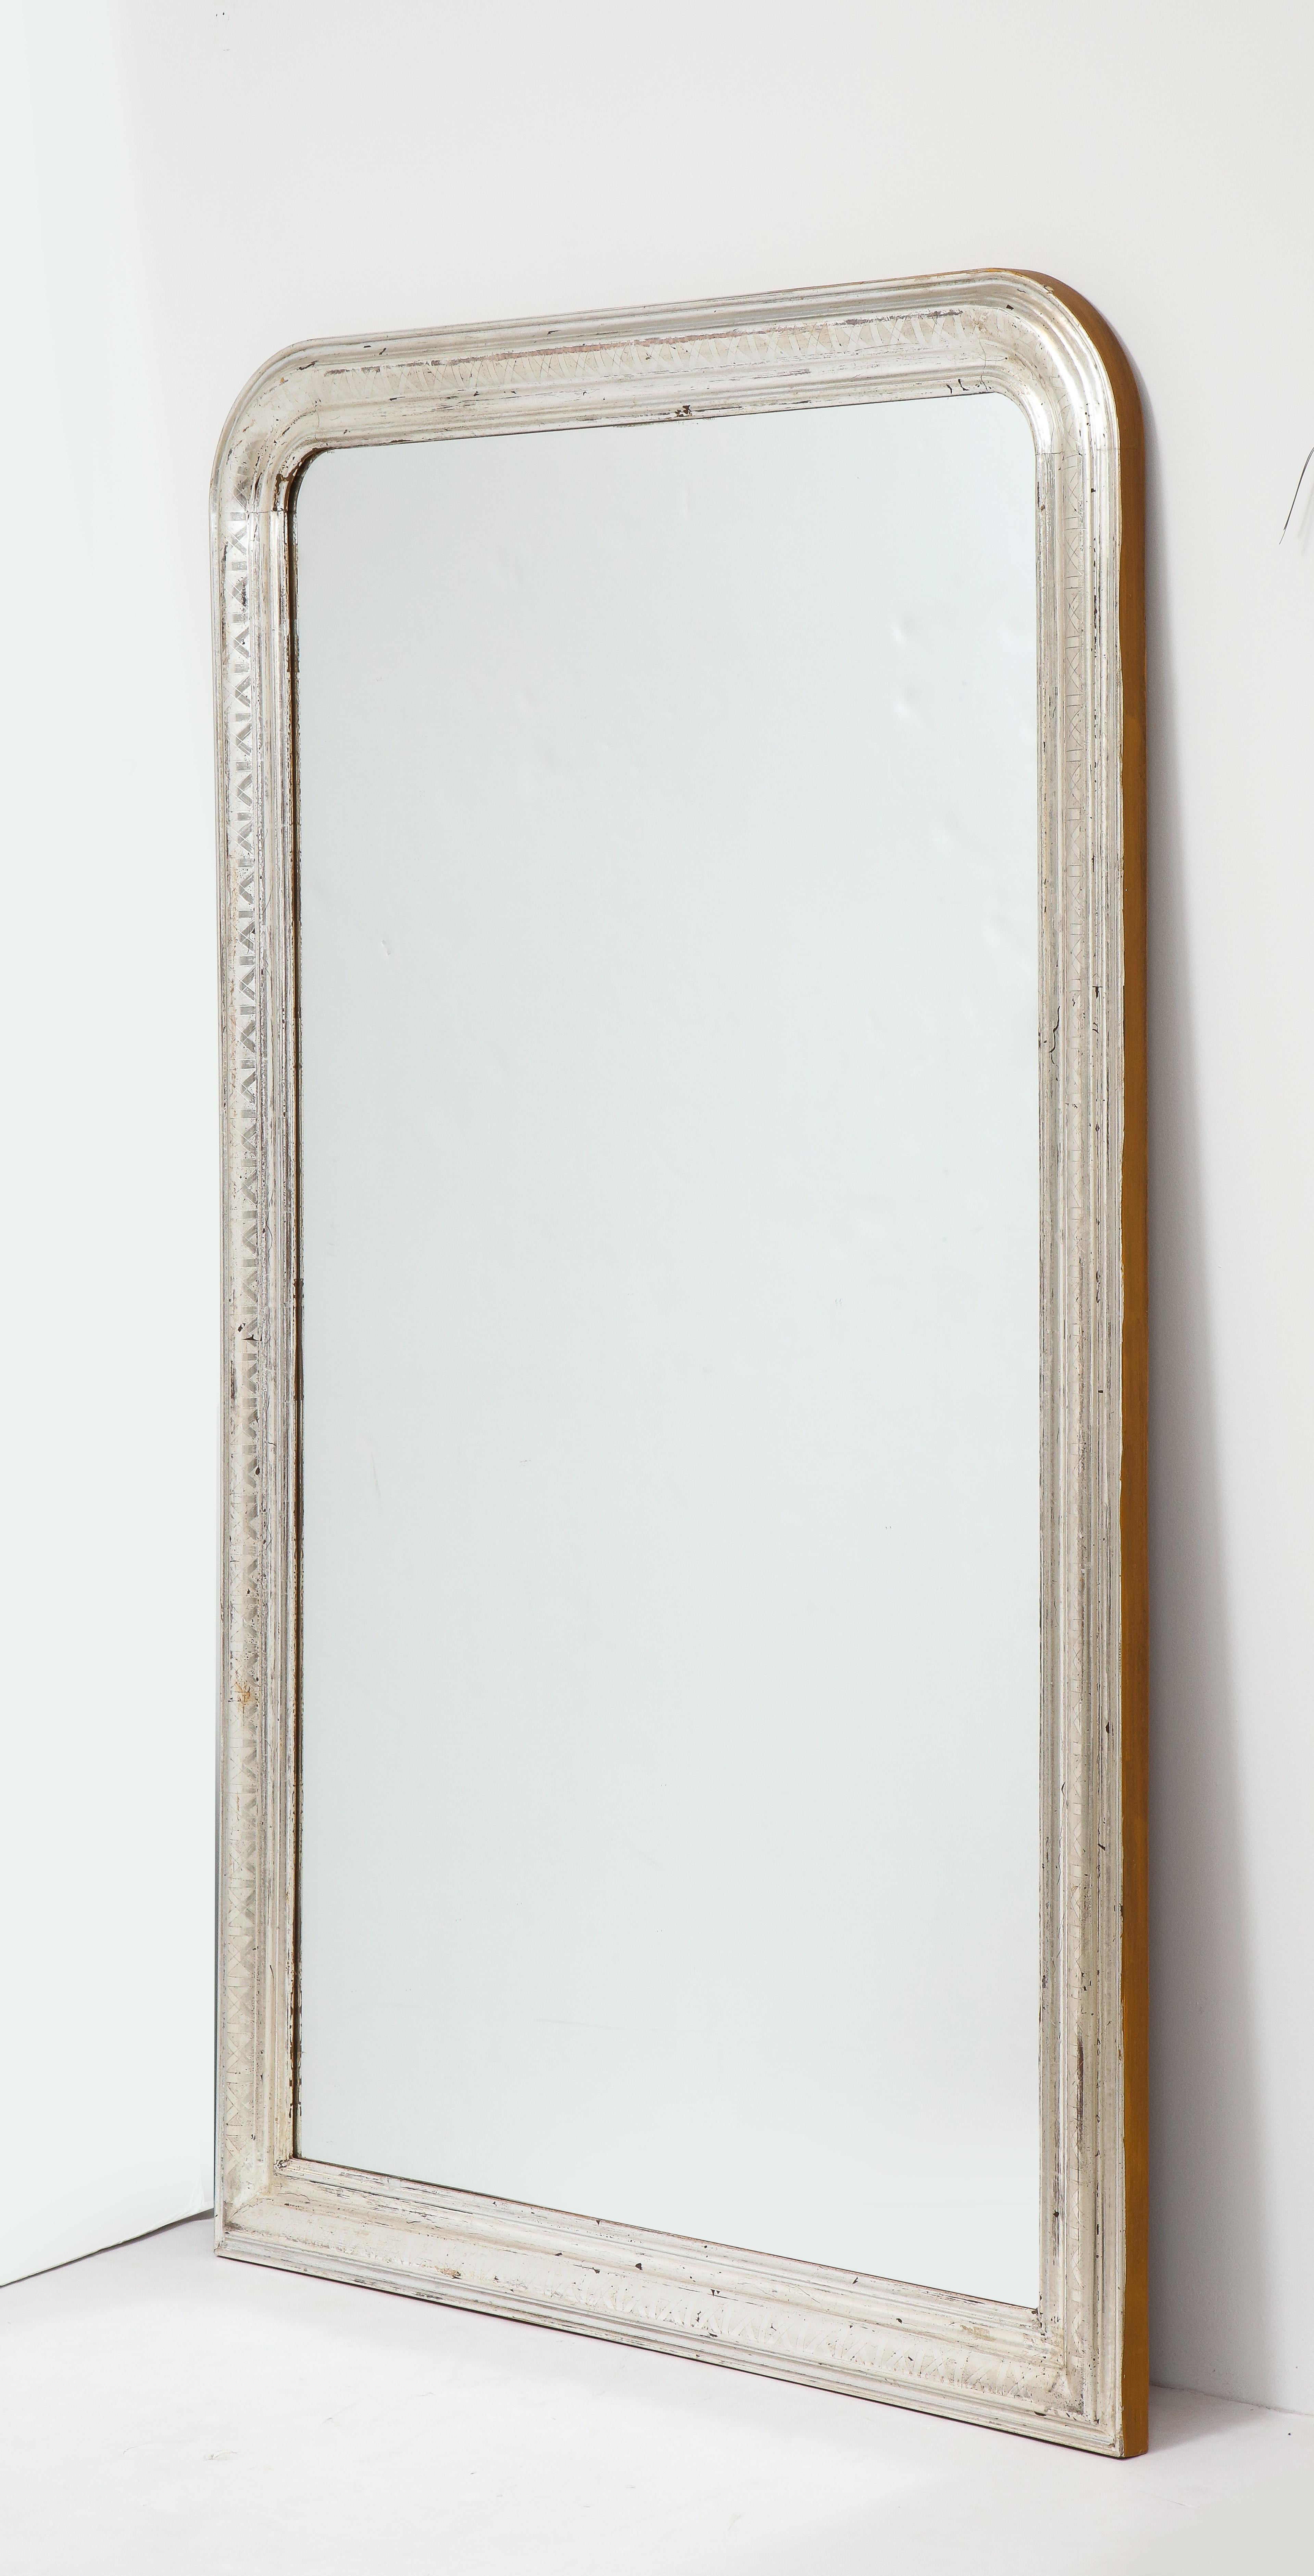 Brilliant Louis Philippe wall mirror with silver gilt frame made in France late 19th century. The frame has rounded upper corners that are typical of the Louis Philippe style. The mirror plate has been replaced. Generously sized, this statement